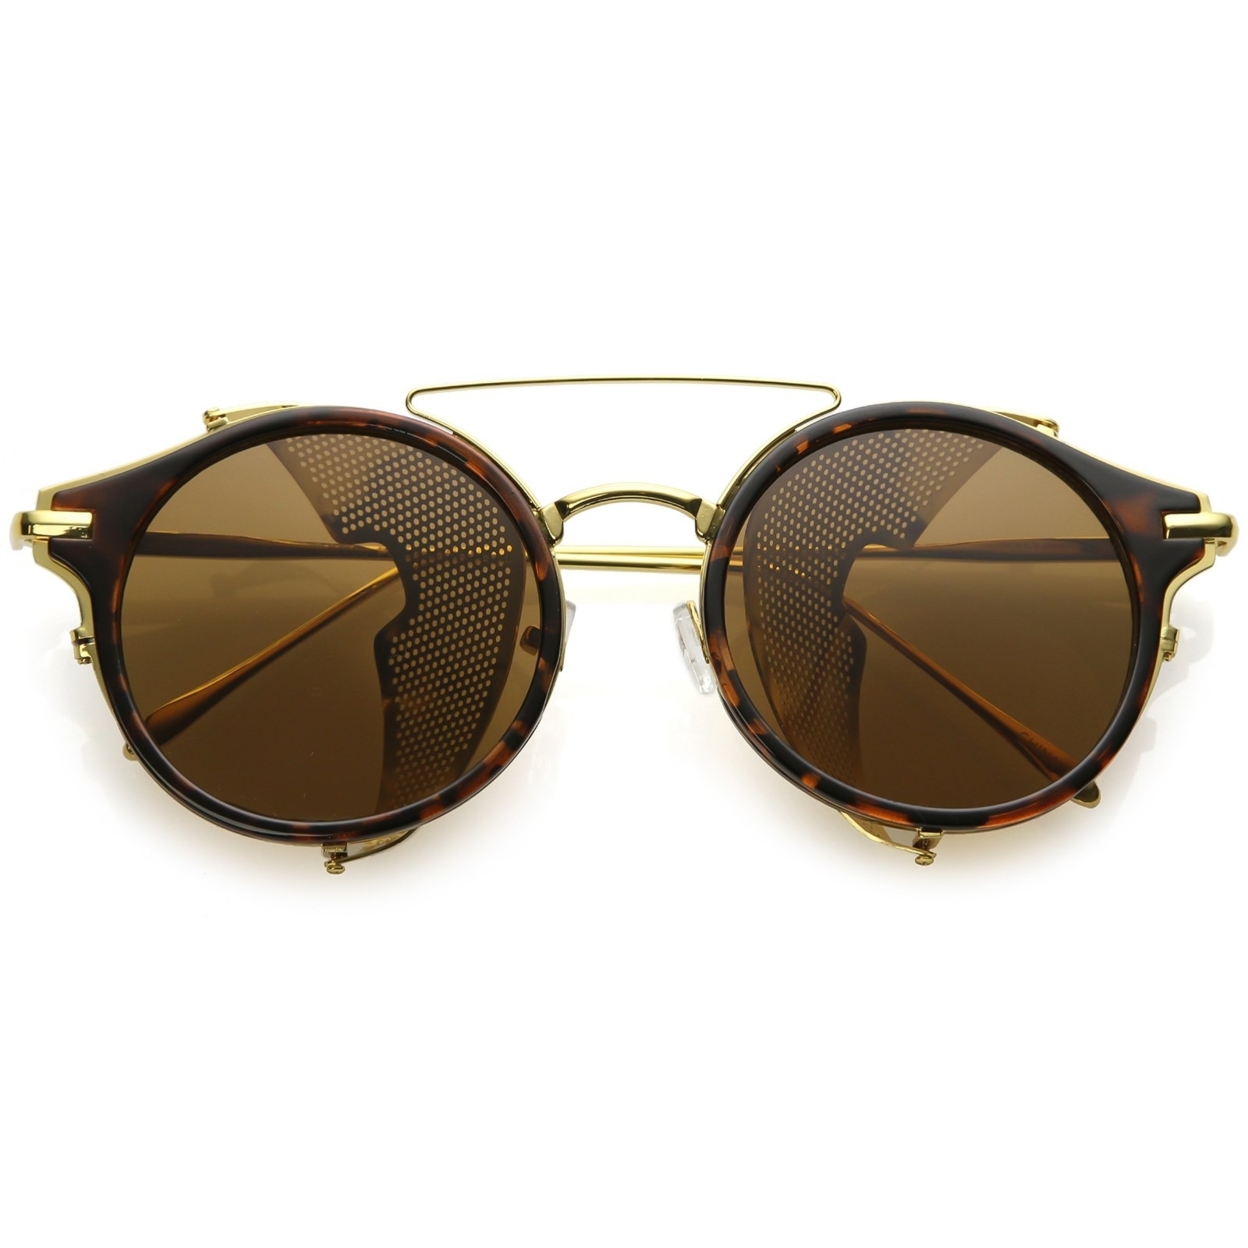 Steampunk Round Horn Rimmed Sunglasses Double Crossbar Fold In Side Covers Flat Lens 54mm - Tortoise Gold / Brown